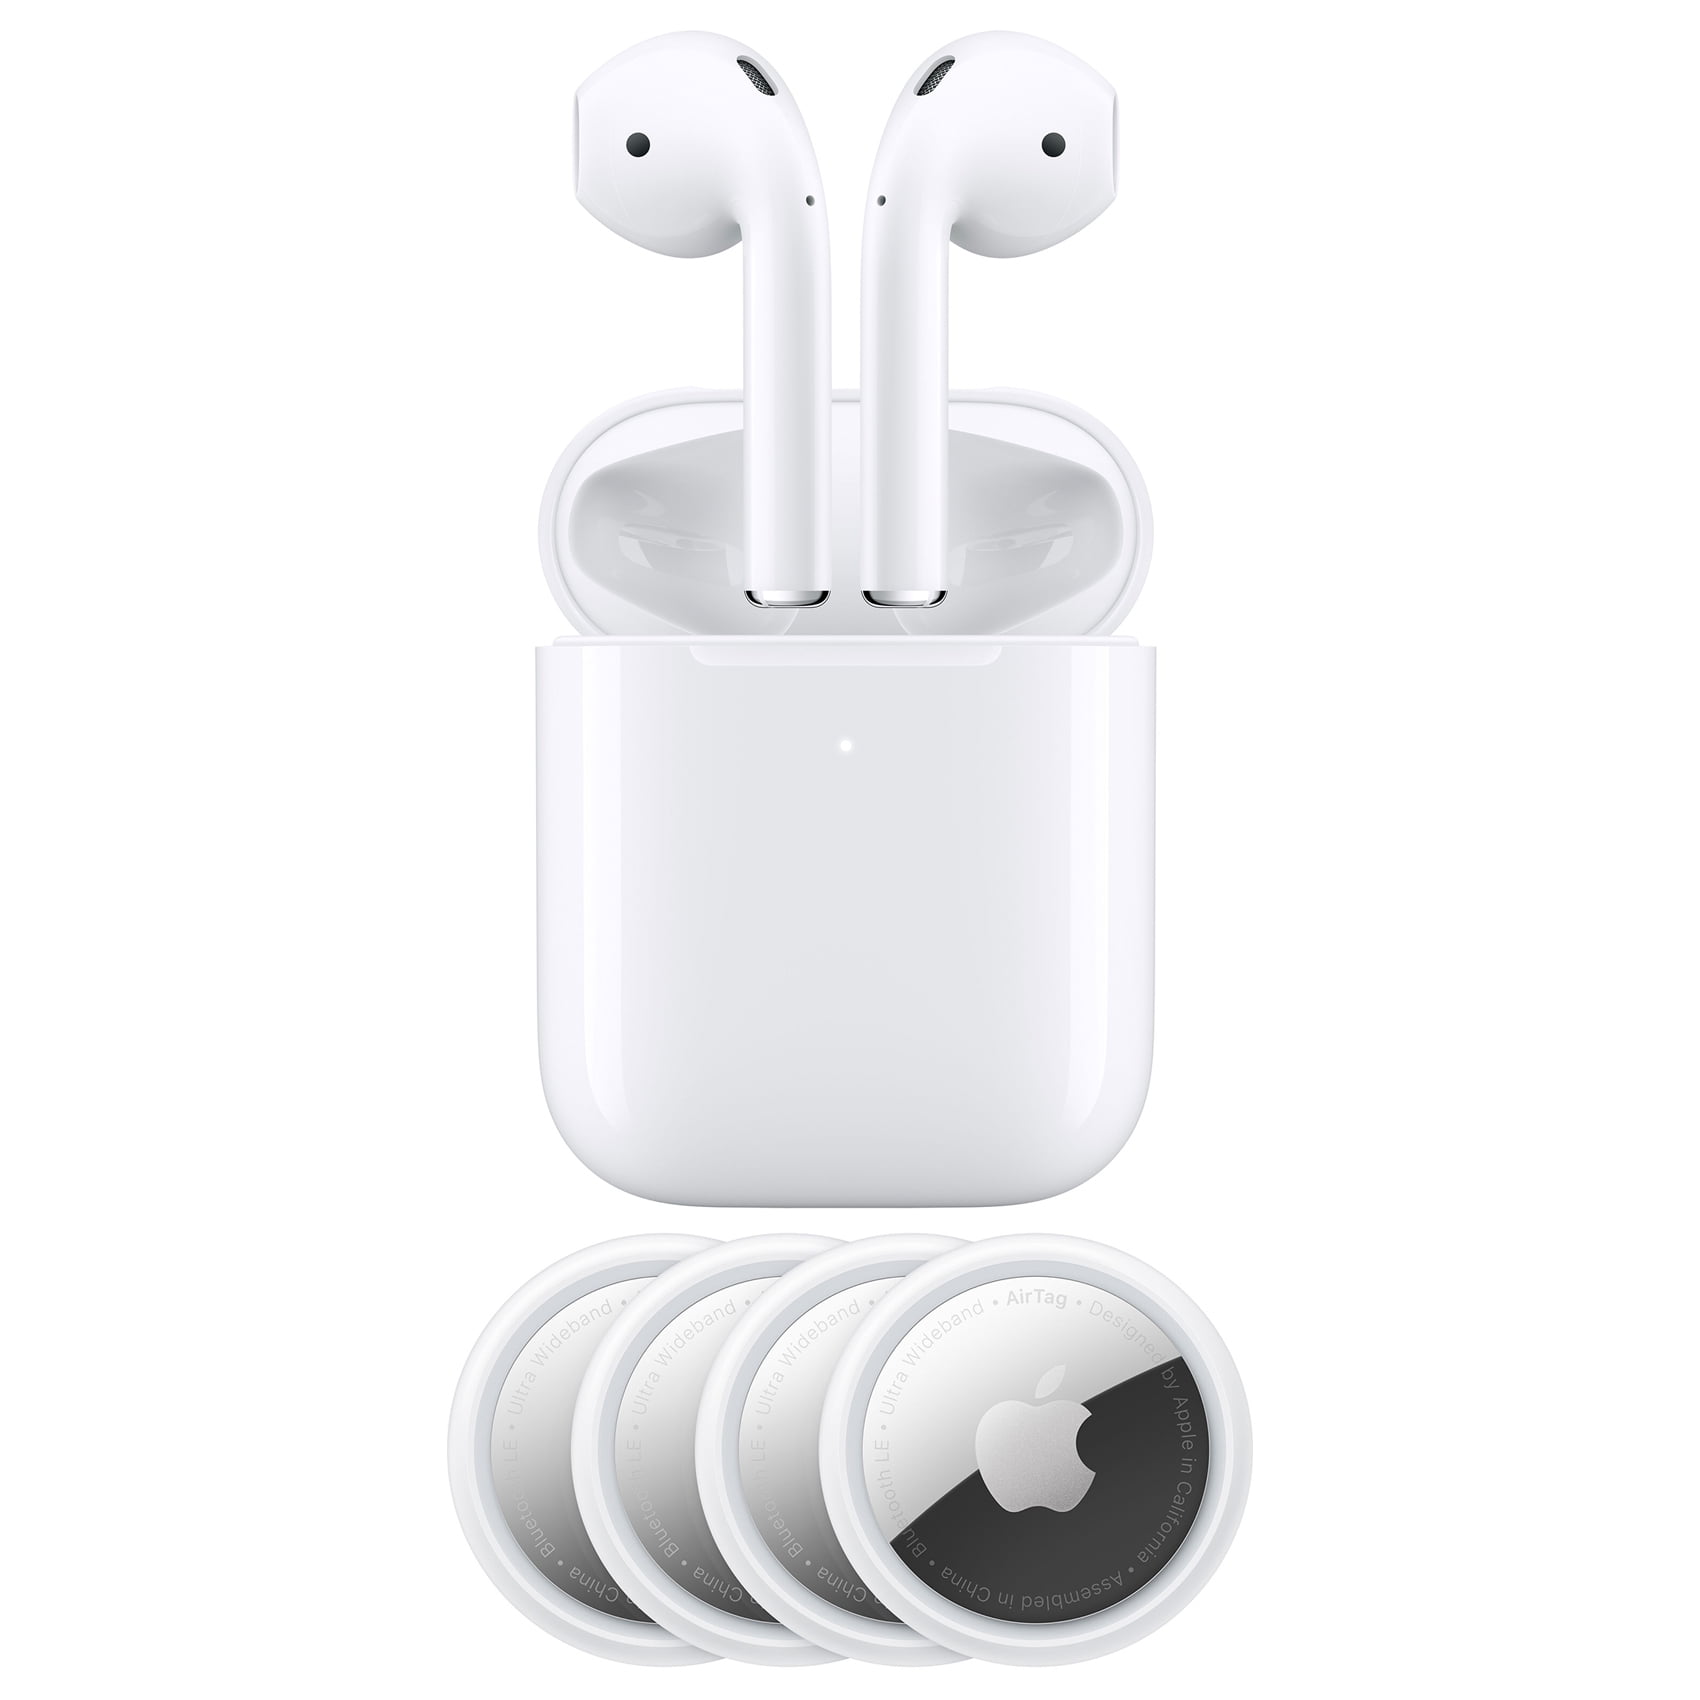 Apple Airpods 2nd with Charging Case 4 Pack Apple AirTag Bundle Walmart.com